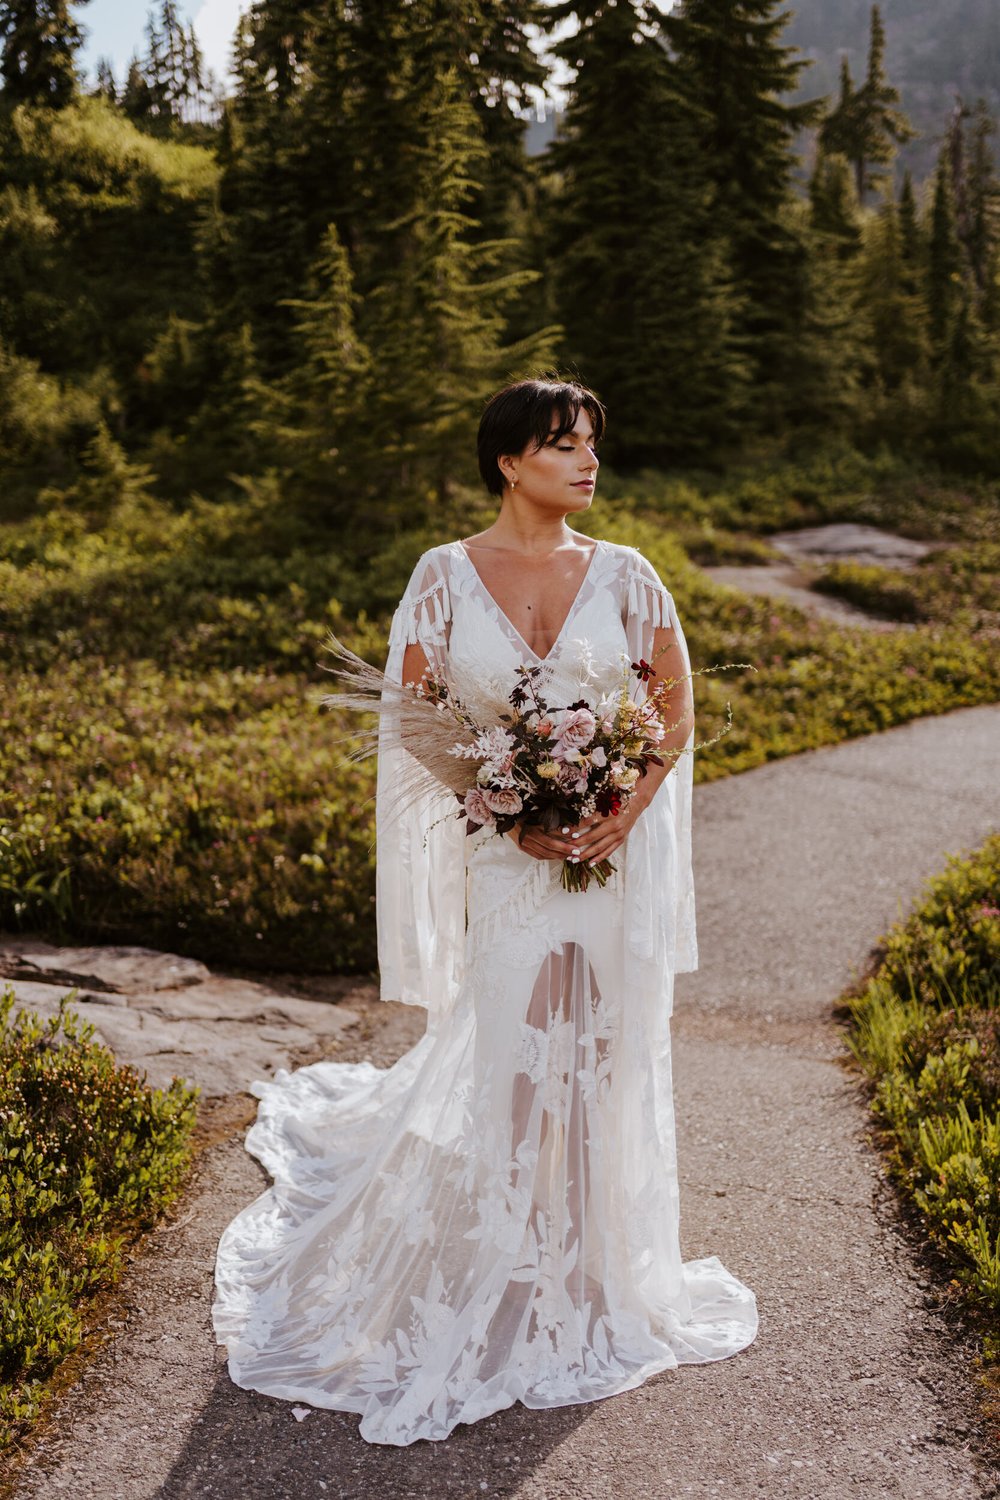 North Cascades National Park Elopement at Picture Lake, lesbian couple, rue de seine dress, beige boho wedding outfits, Photography by Tida Svy | www.tidasvy.com